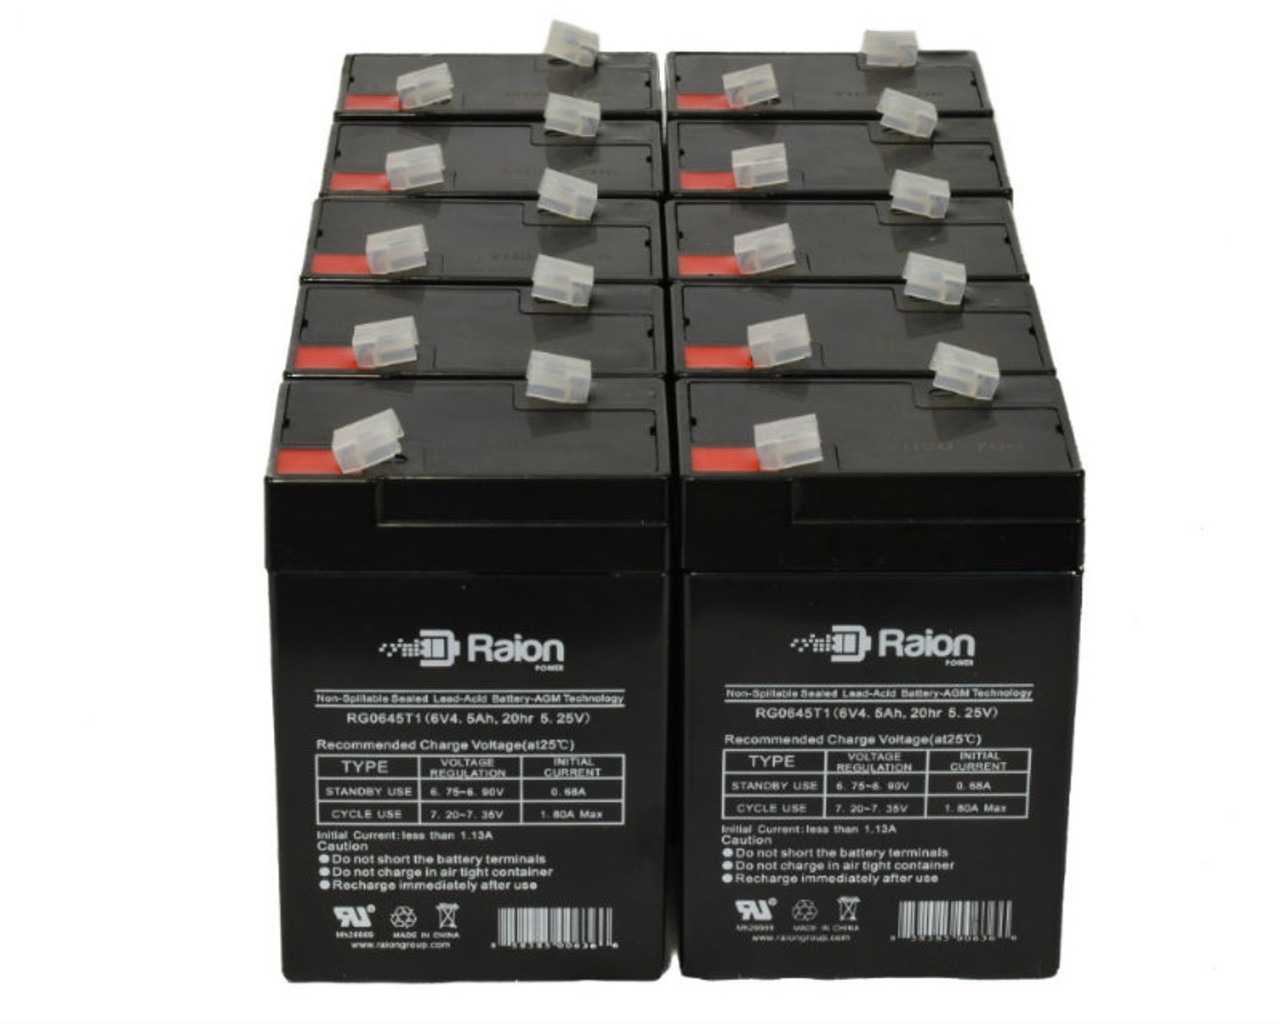 Raion Power 6 Volt 4.5Ah RG0645T1 Replacement Battery for SBB 3FM4 - 10 Pack